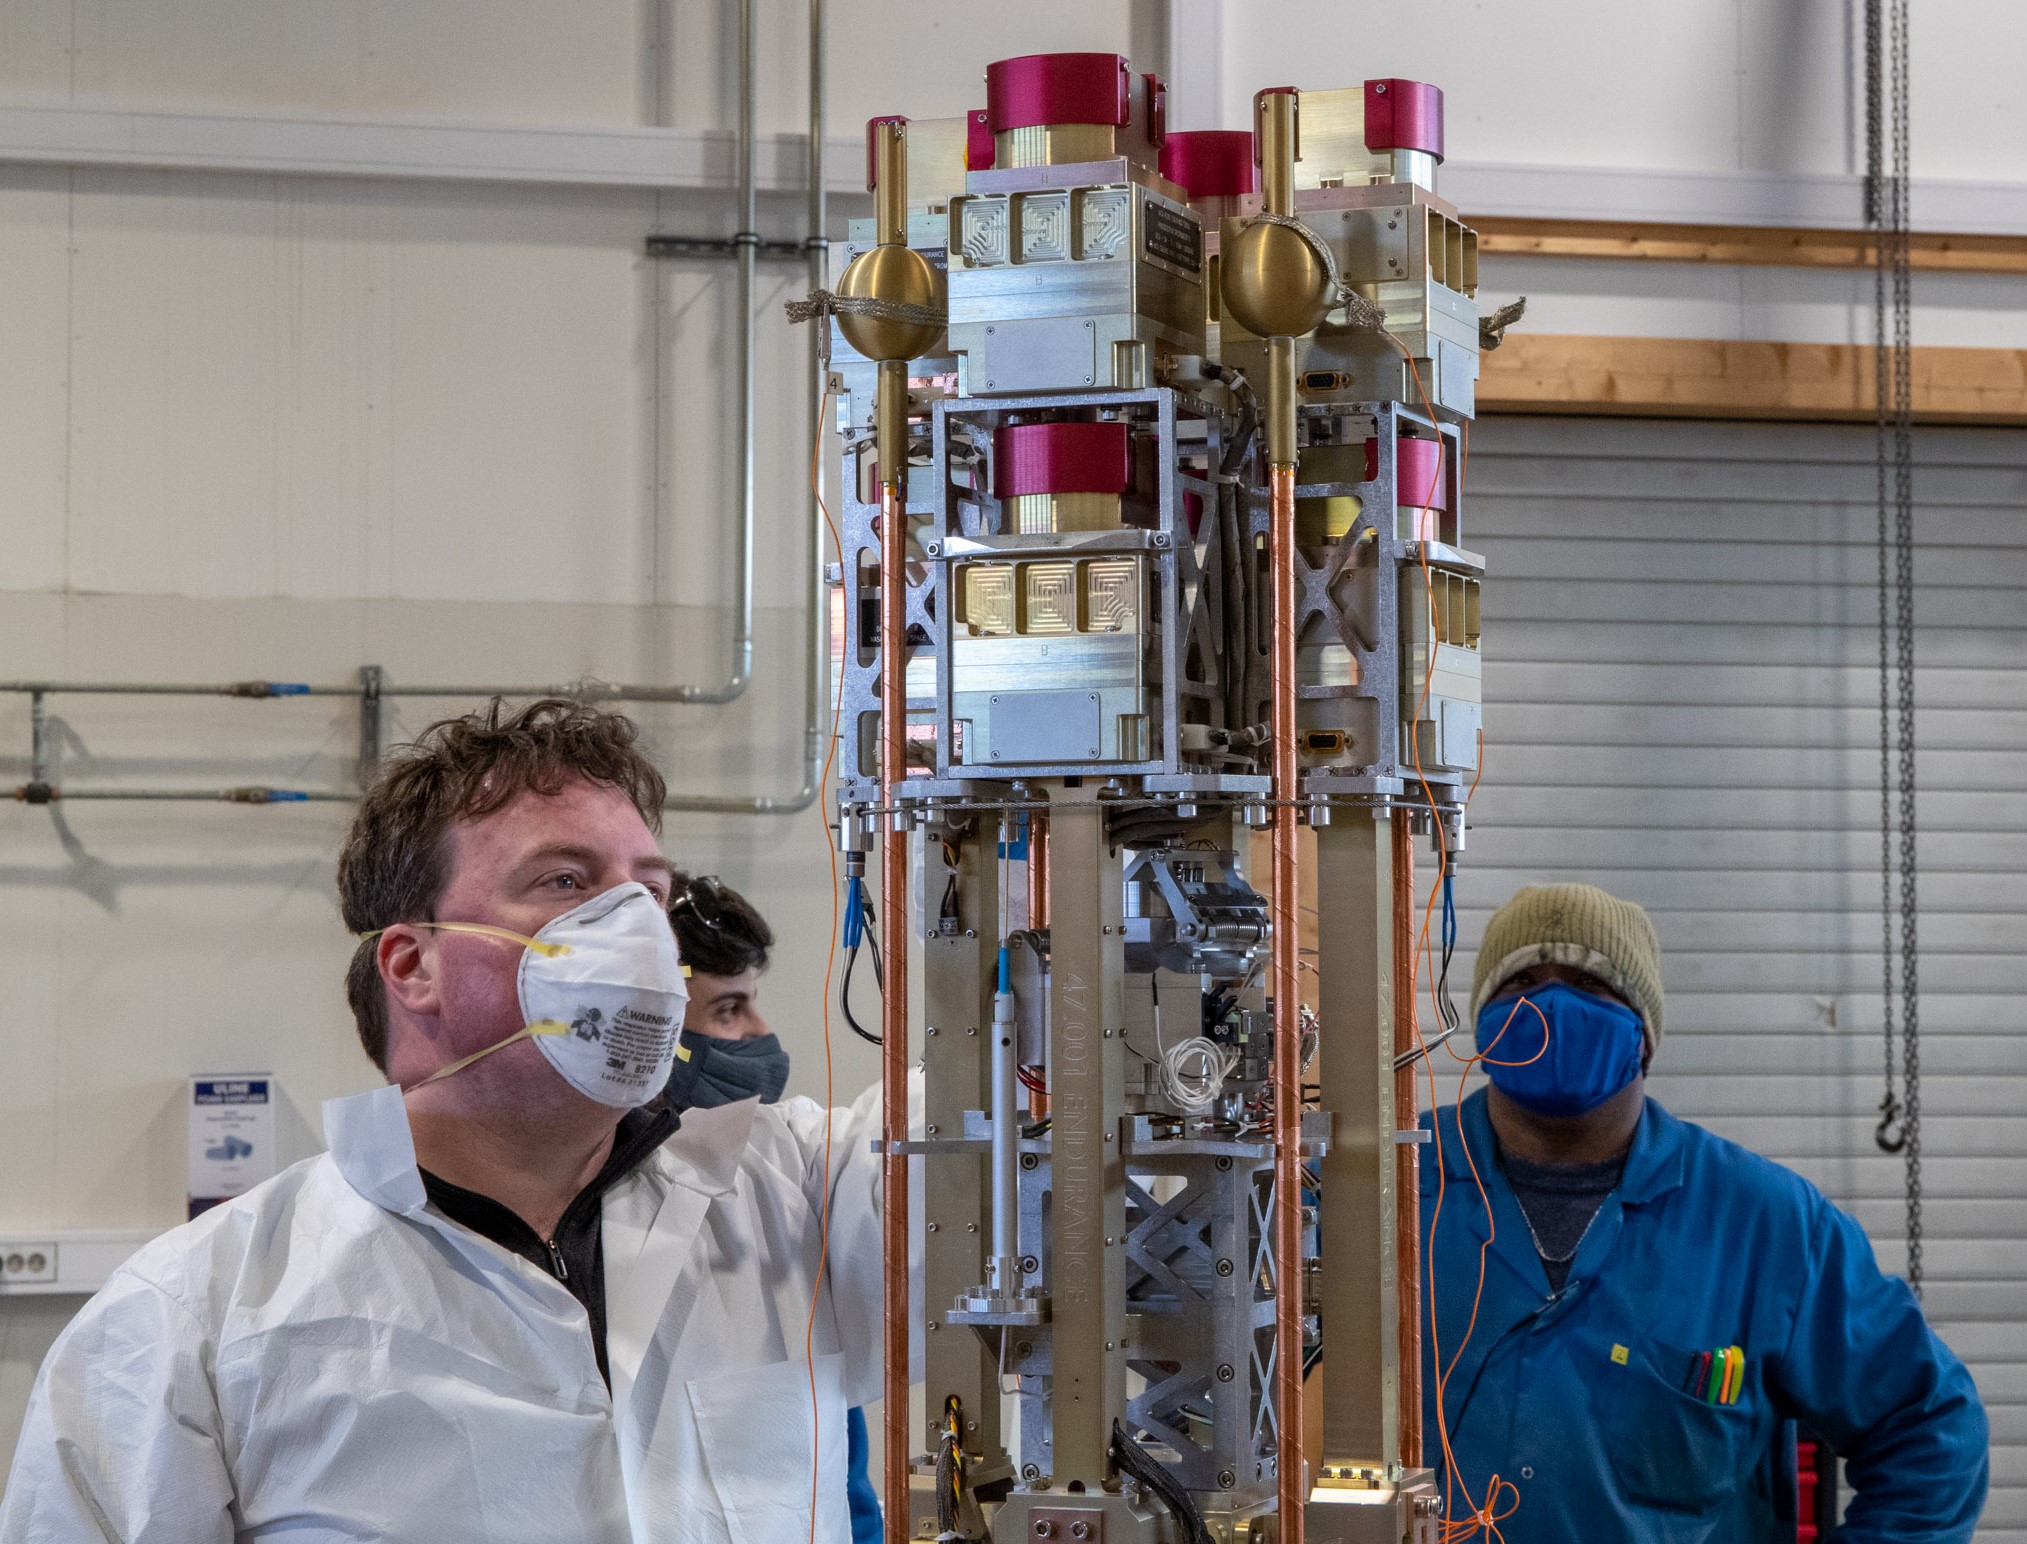 Man looking at uncovered rocket instrument